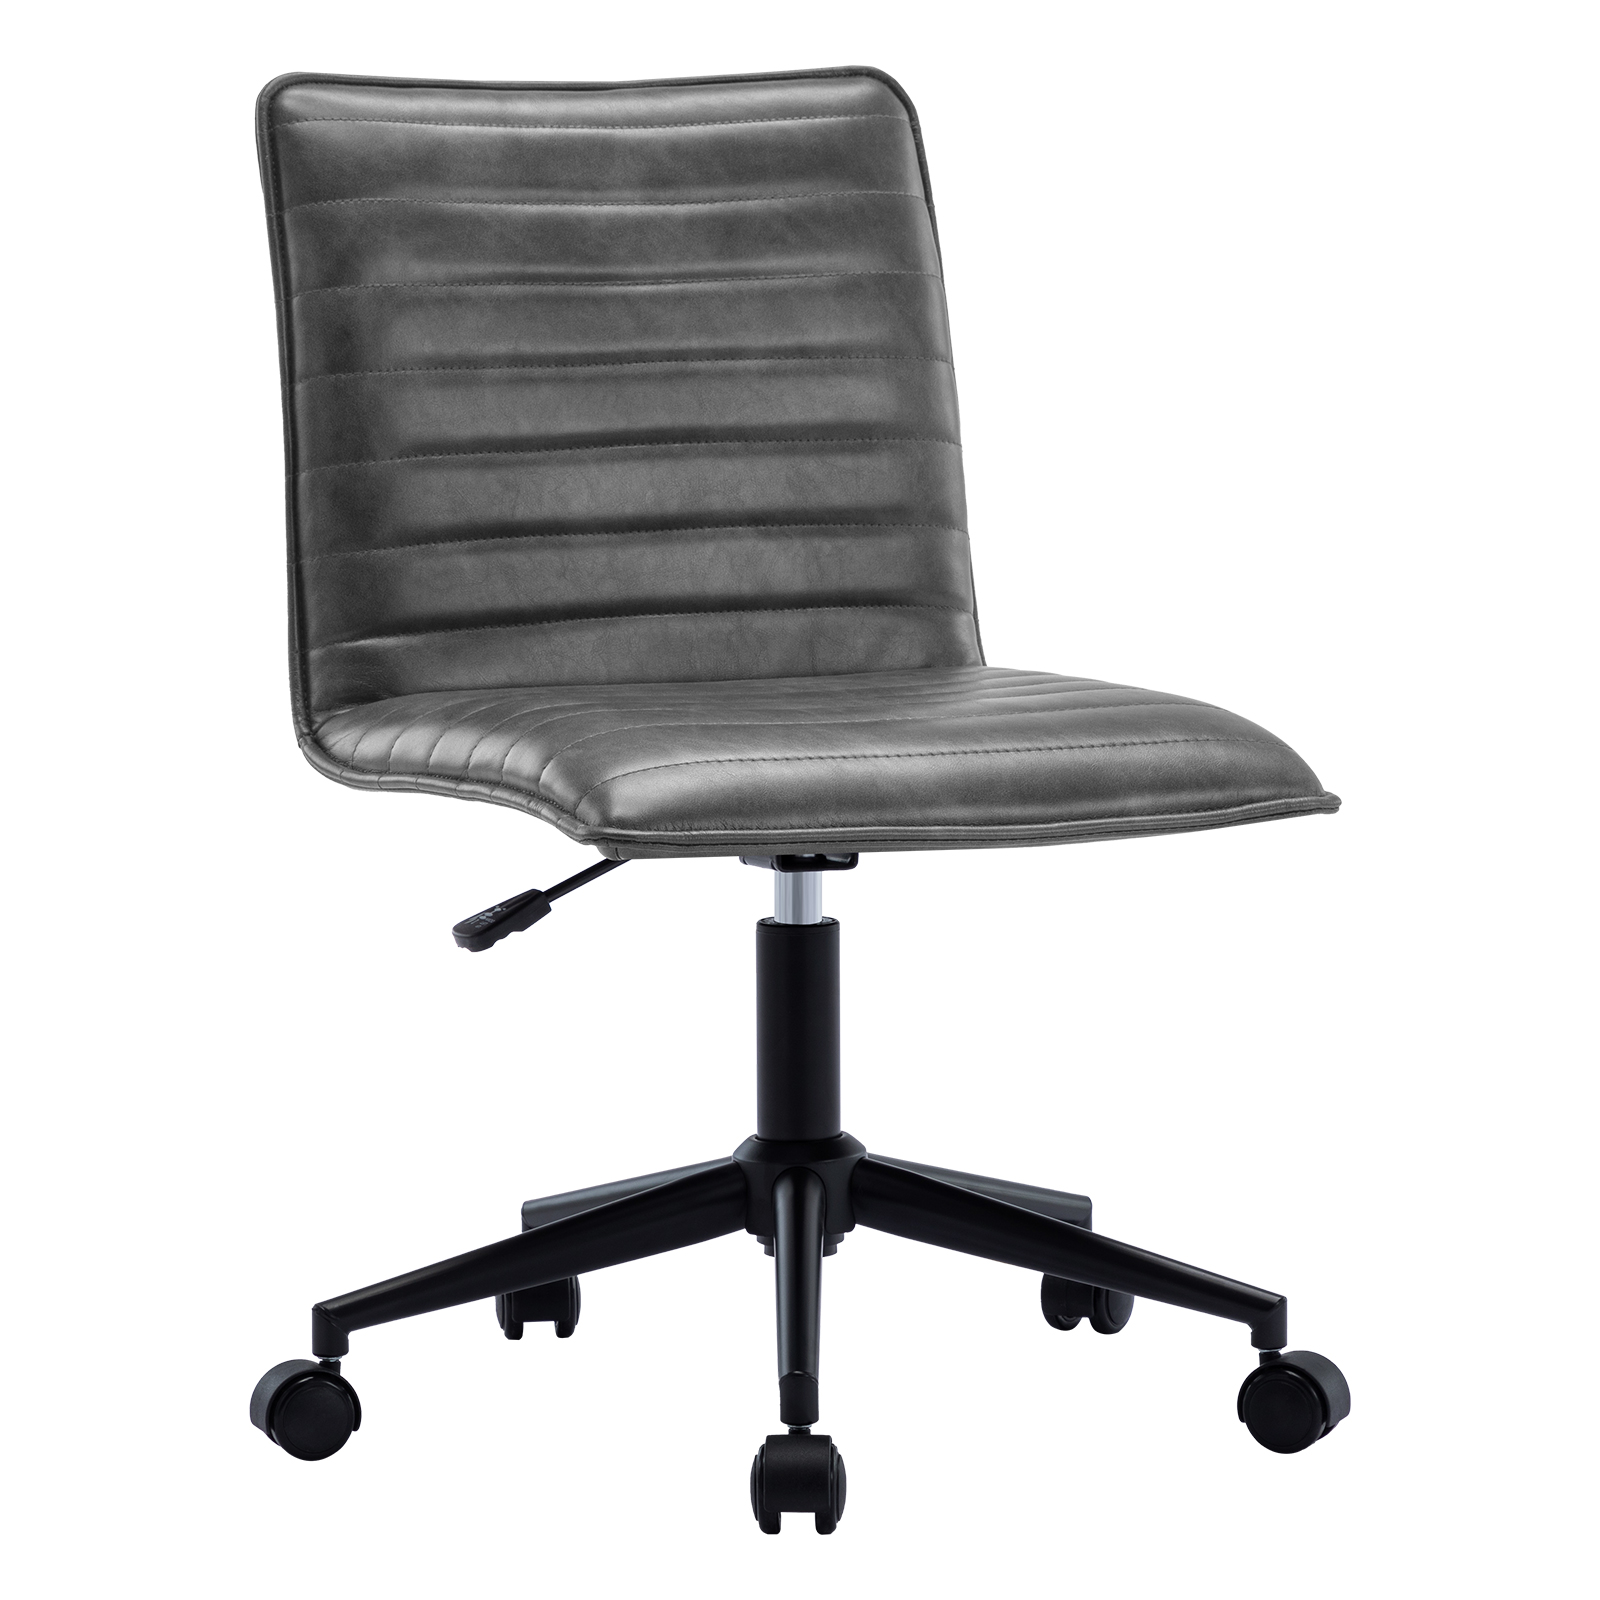 Duhome Elegant Lifestyle Leather Office, Leather Armless Office Chair